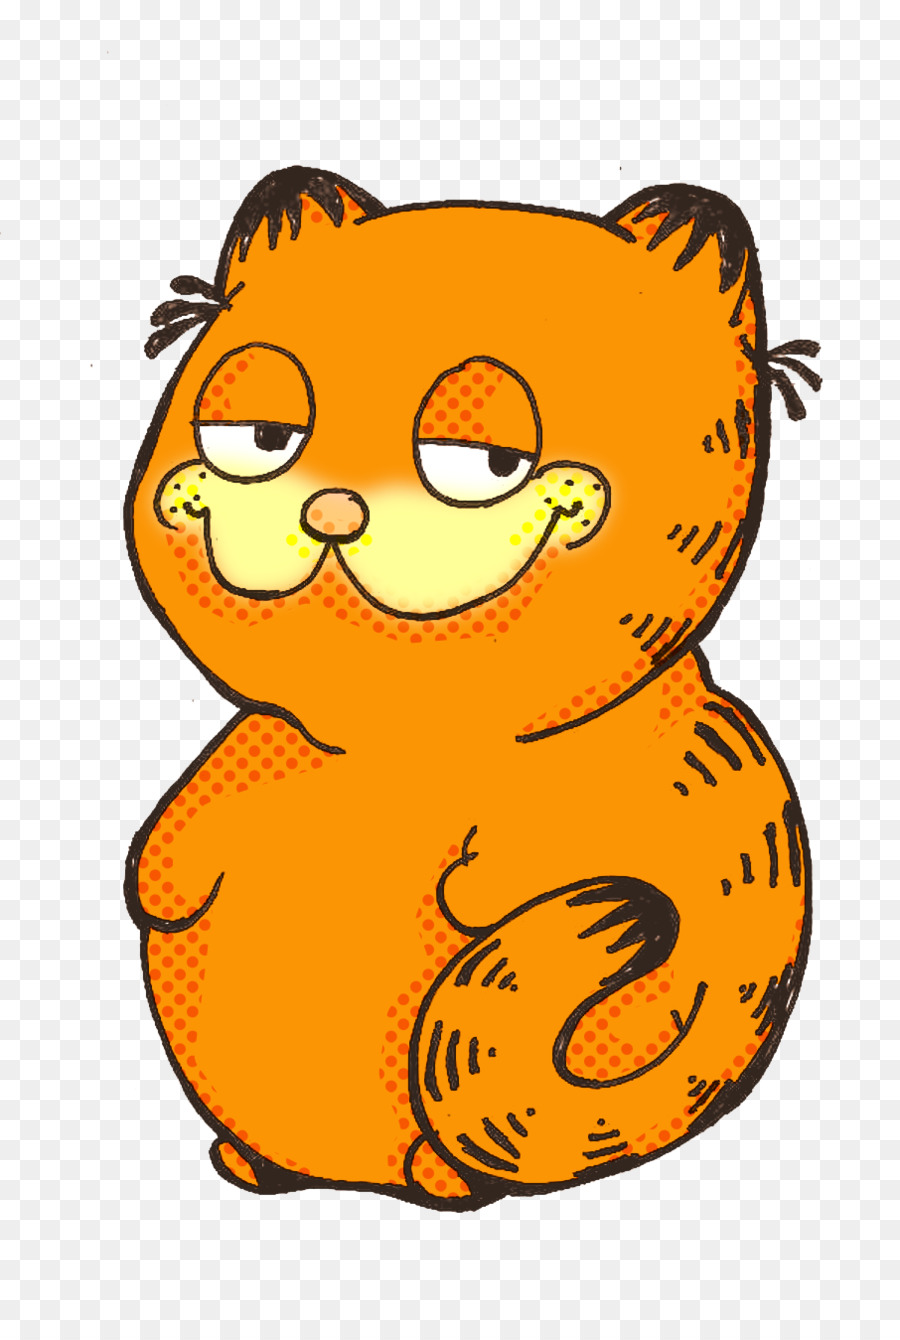 Whiskers Clip art Dog Cartoon Cat - Garfield Friends Coloring Pages png download - 906*1344 - Free Transparent Whiskers png Download.